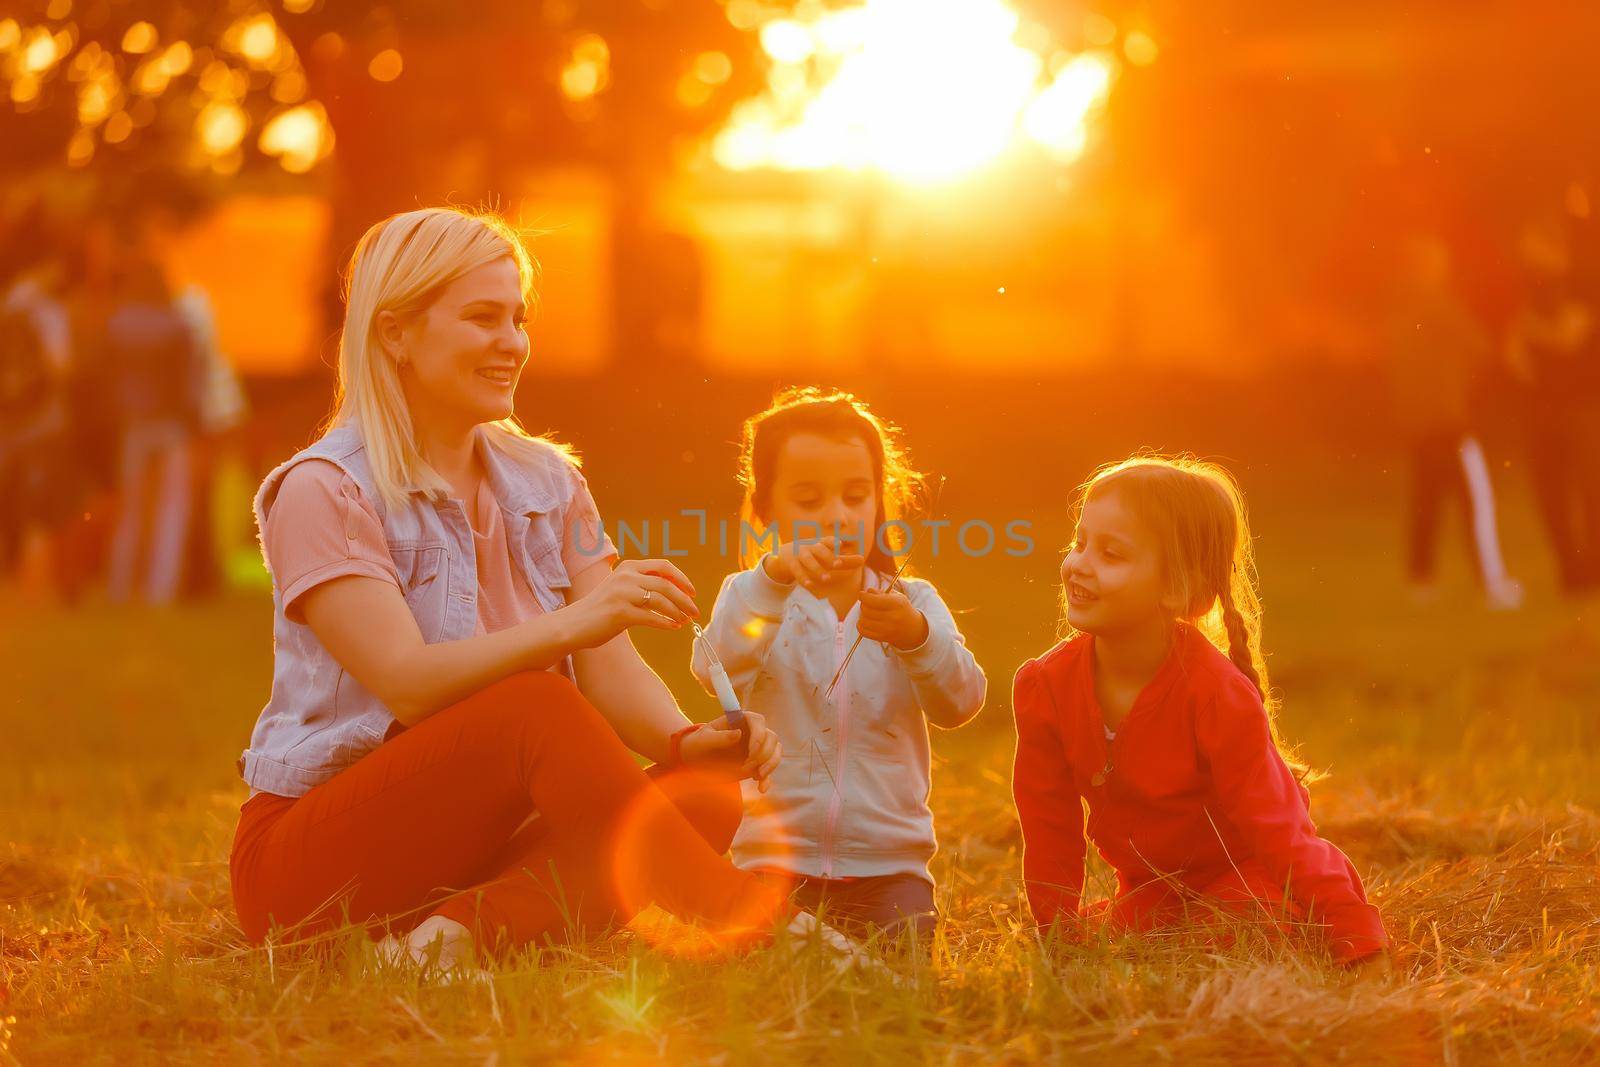 Two little girls are blowing soap bubbles, outdoor shoot